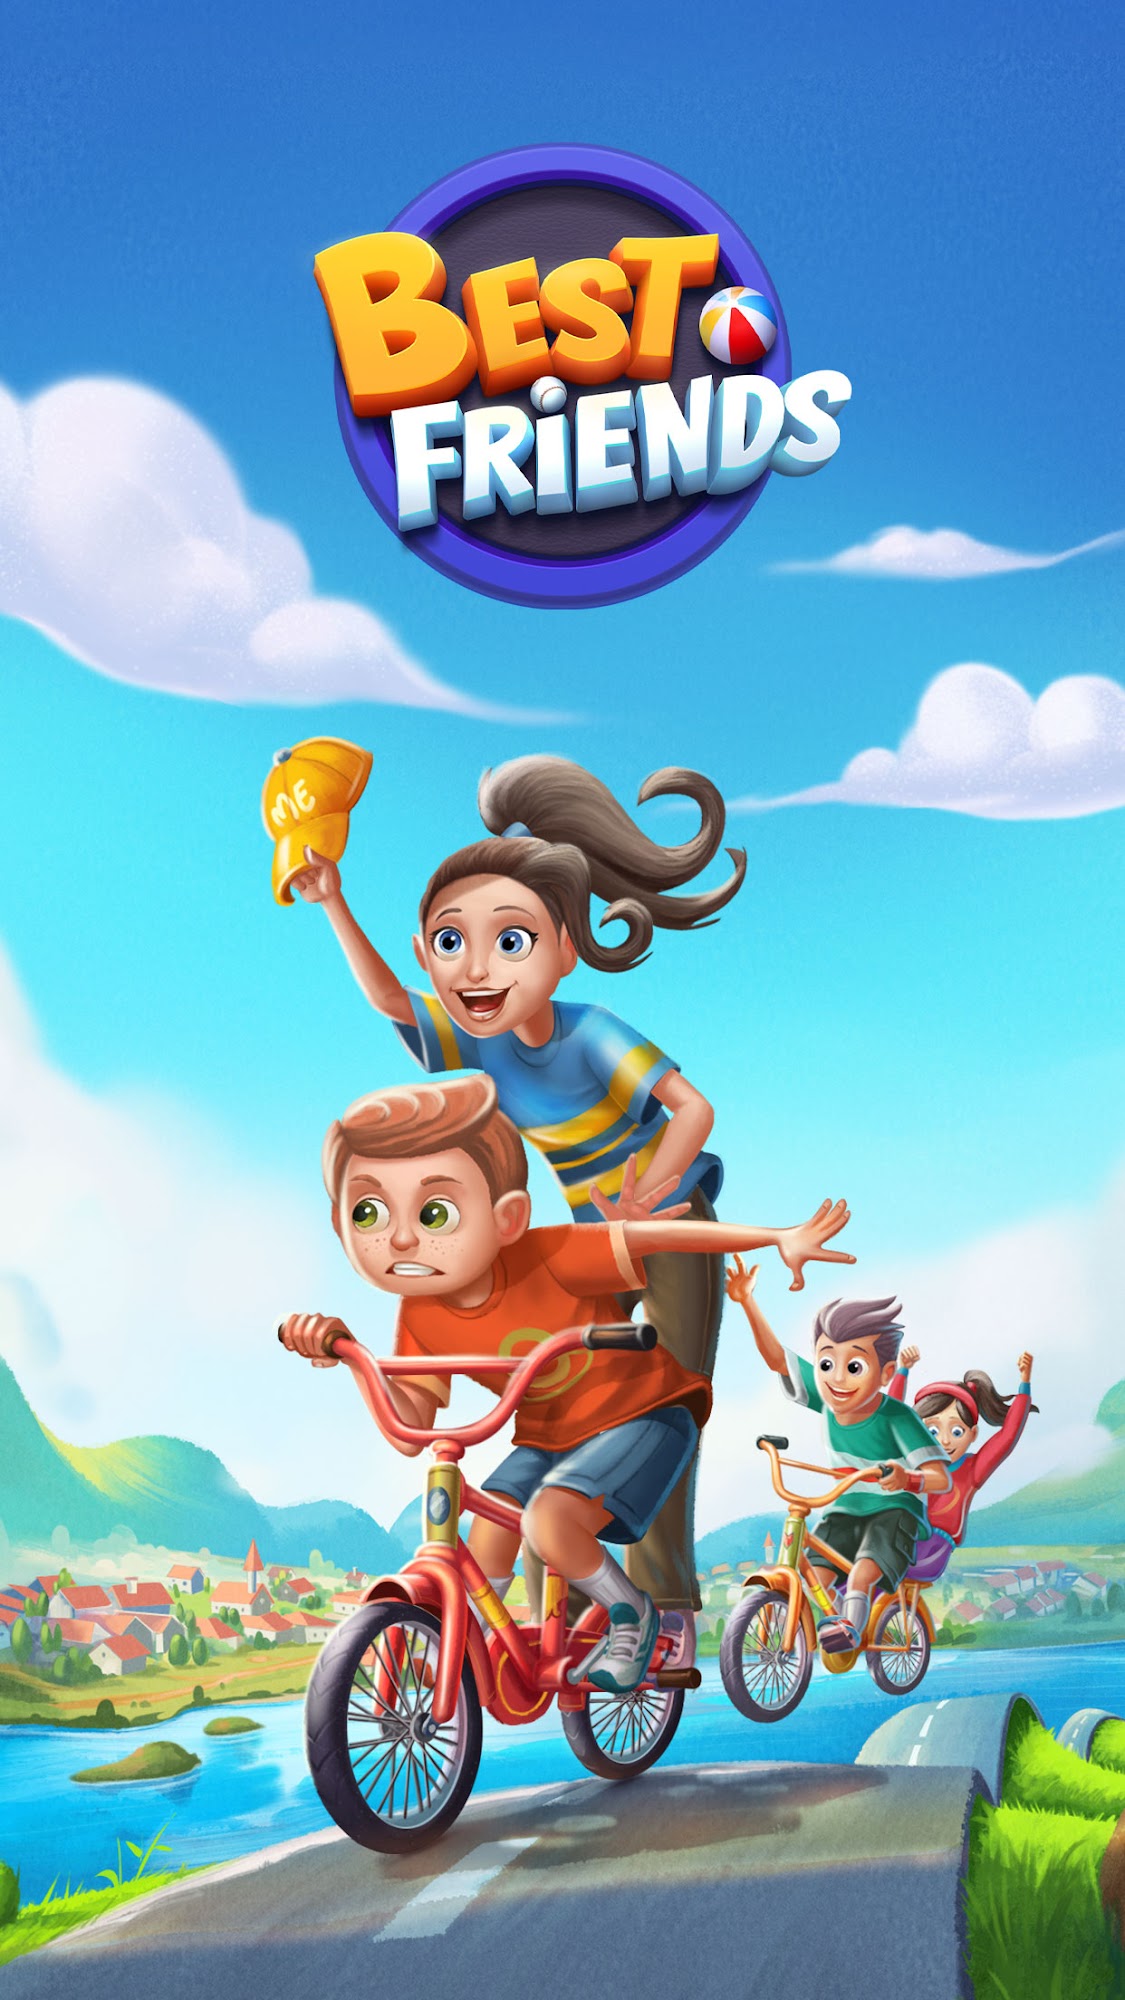 Scarica Best Friends: Puzzle & Match gratis per Android.